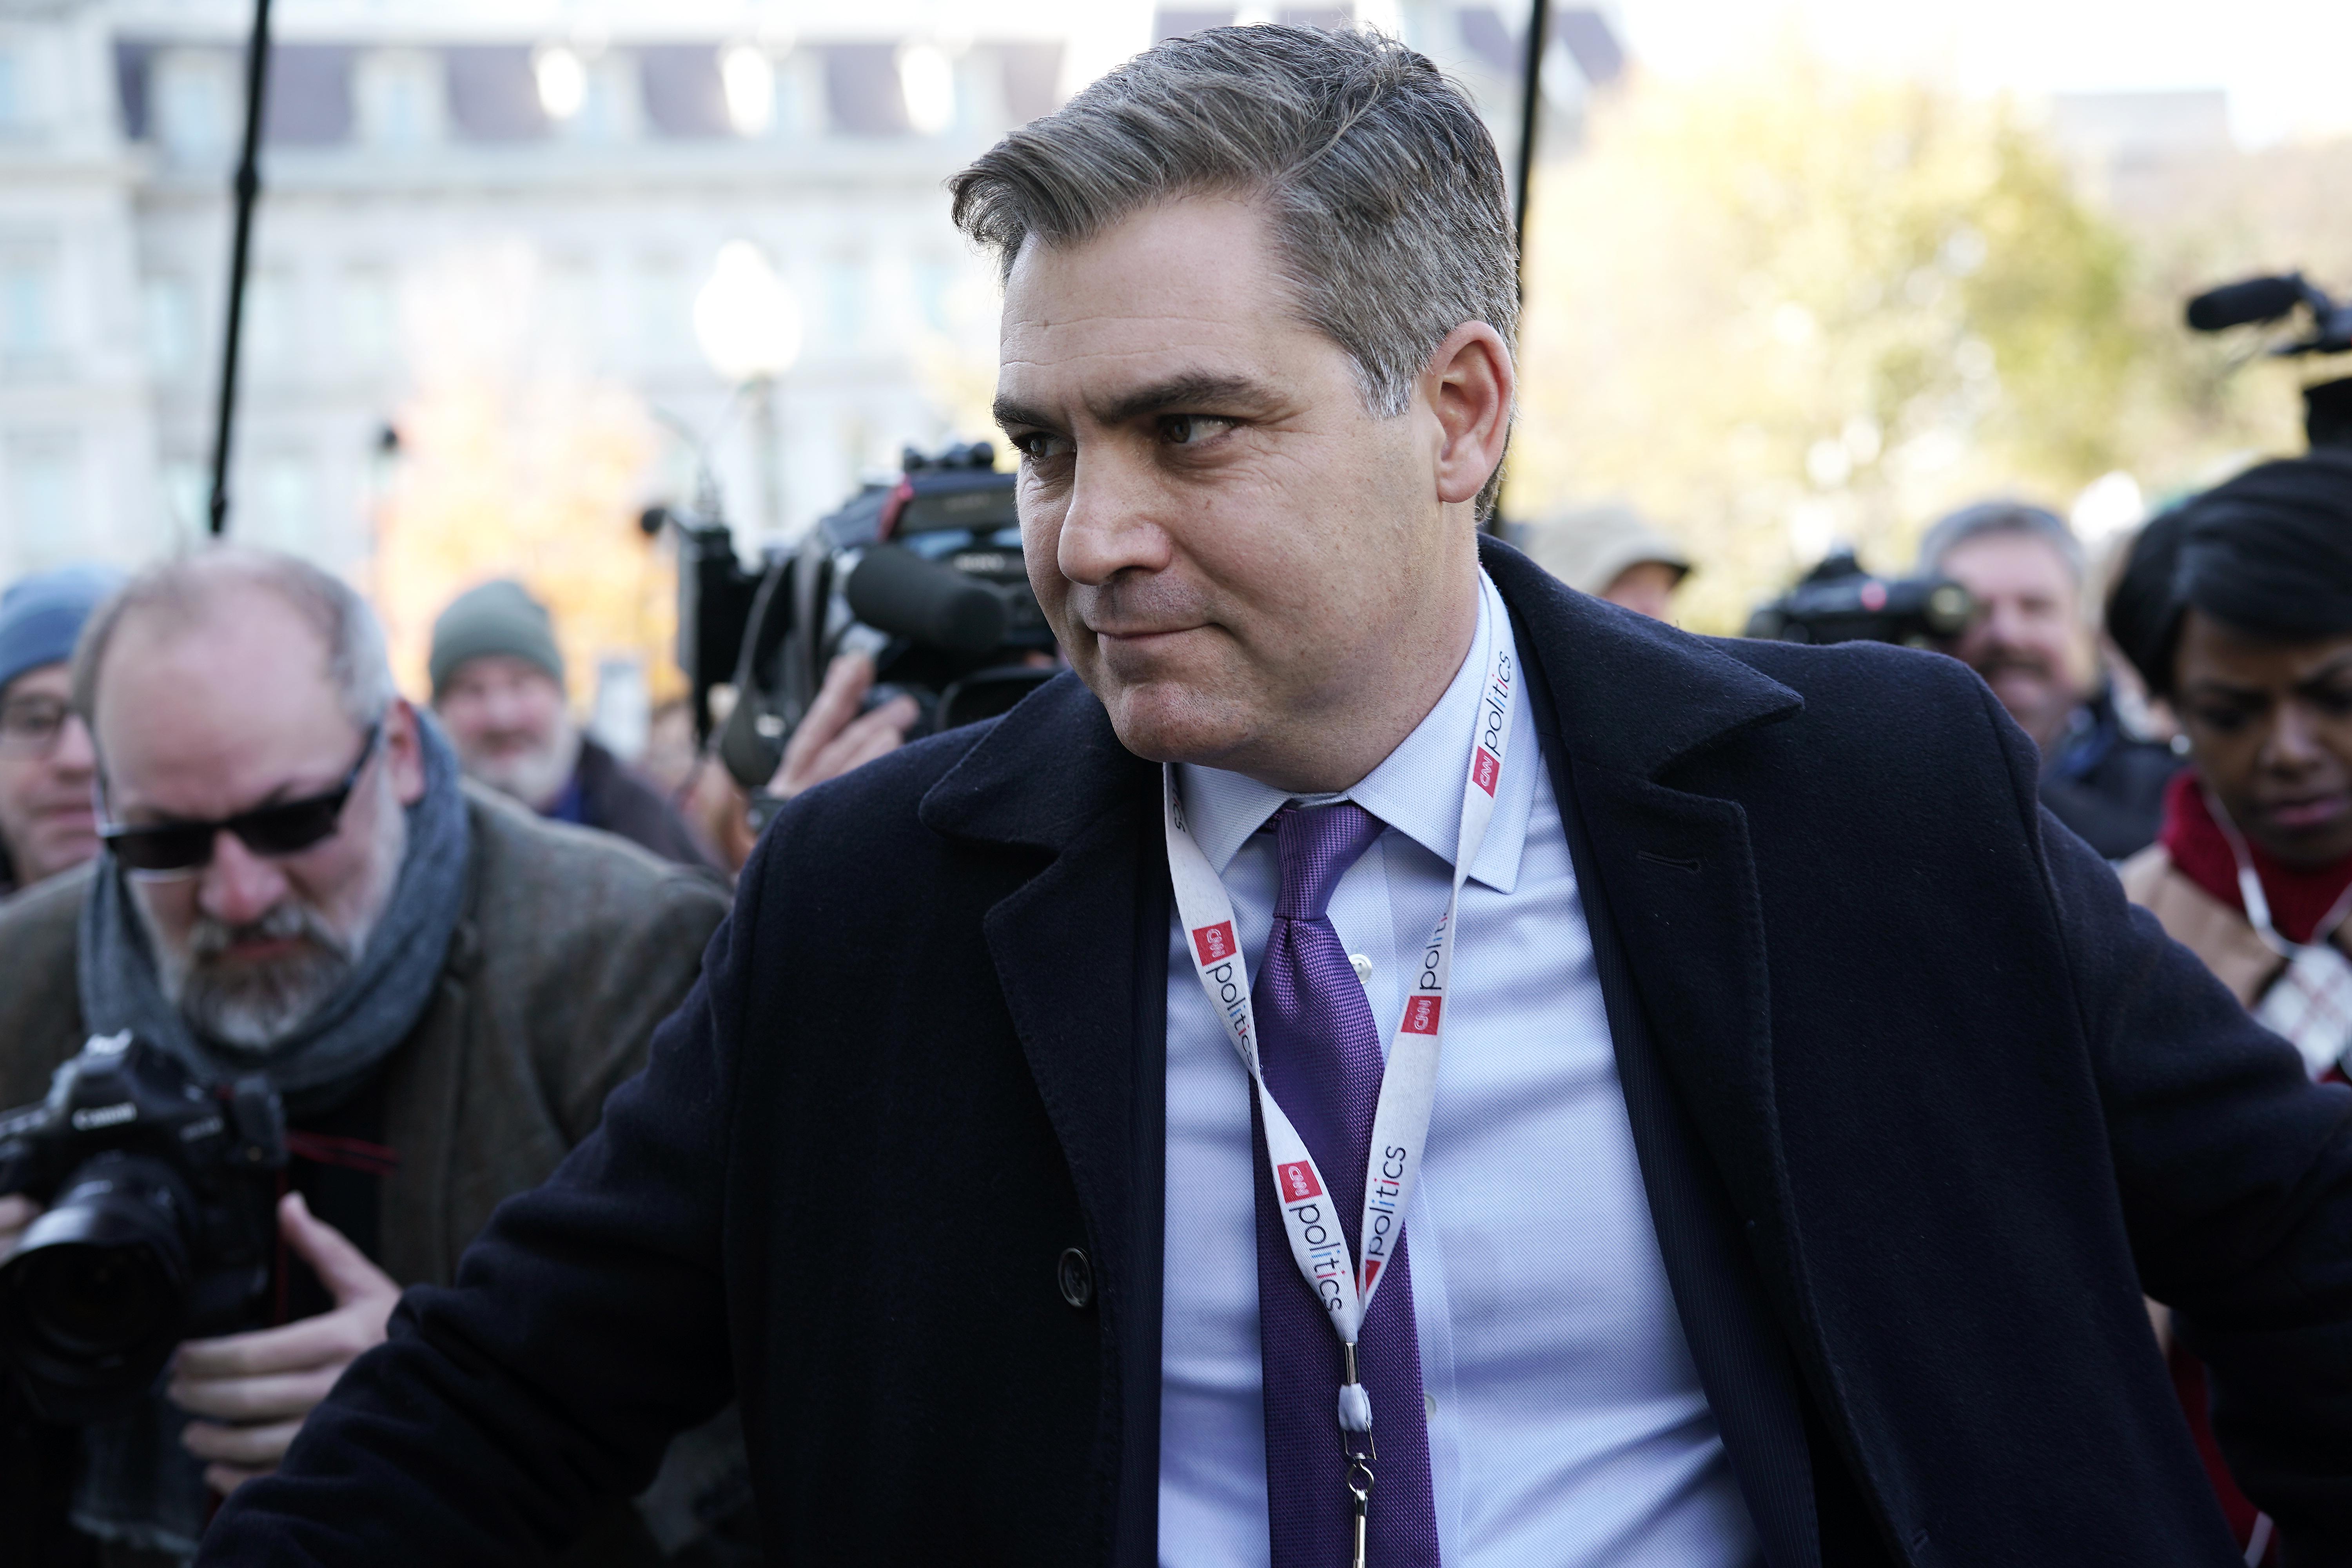 CNN reporter Jim Acosta entering the White House after having his press access restored